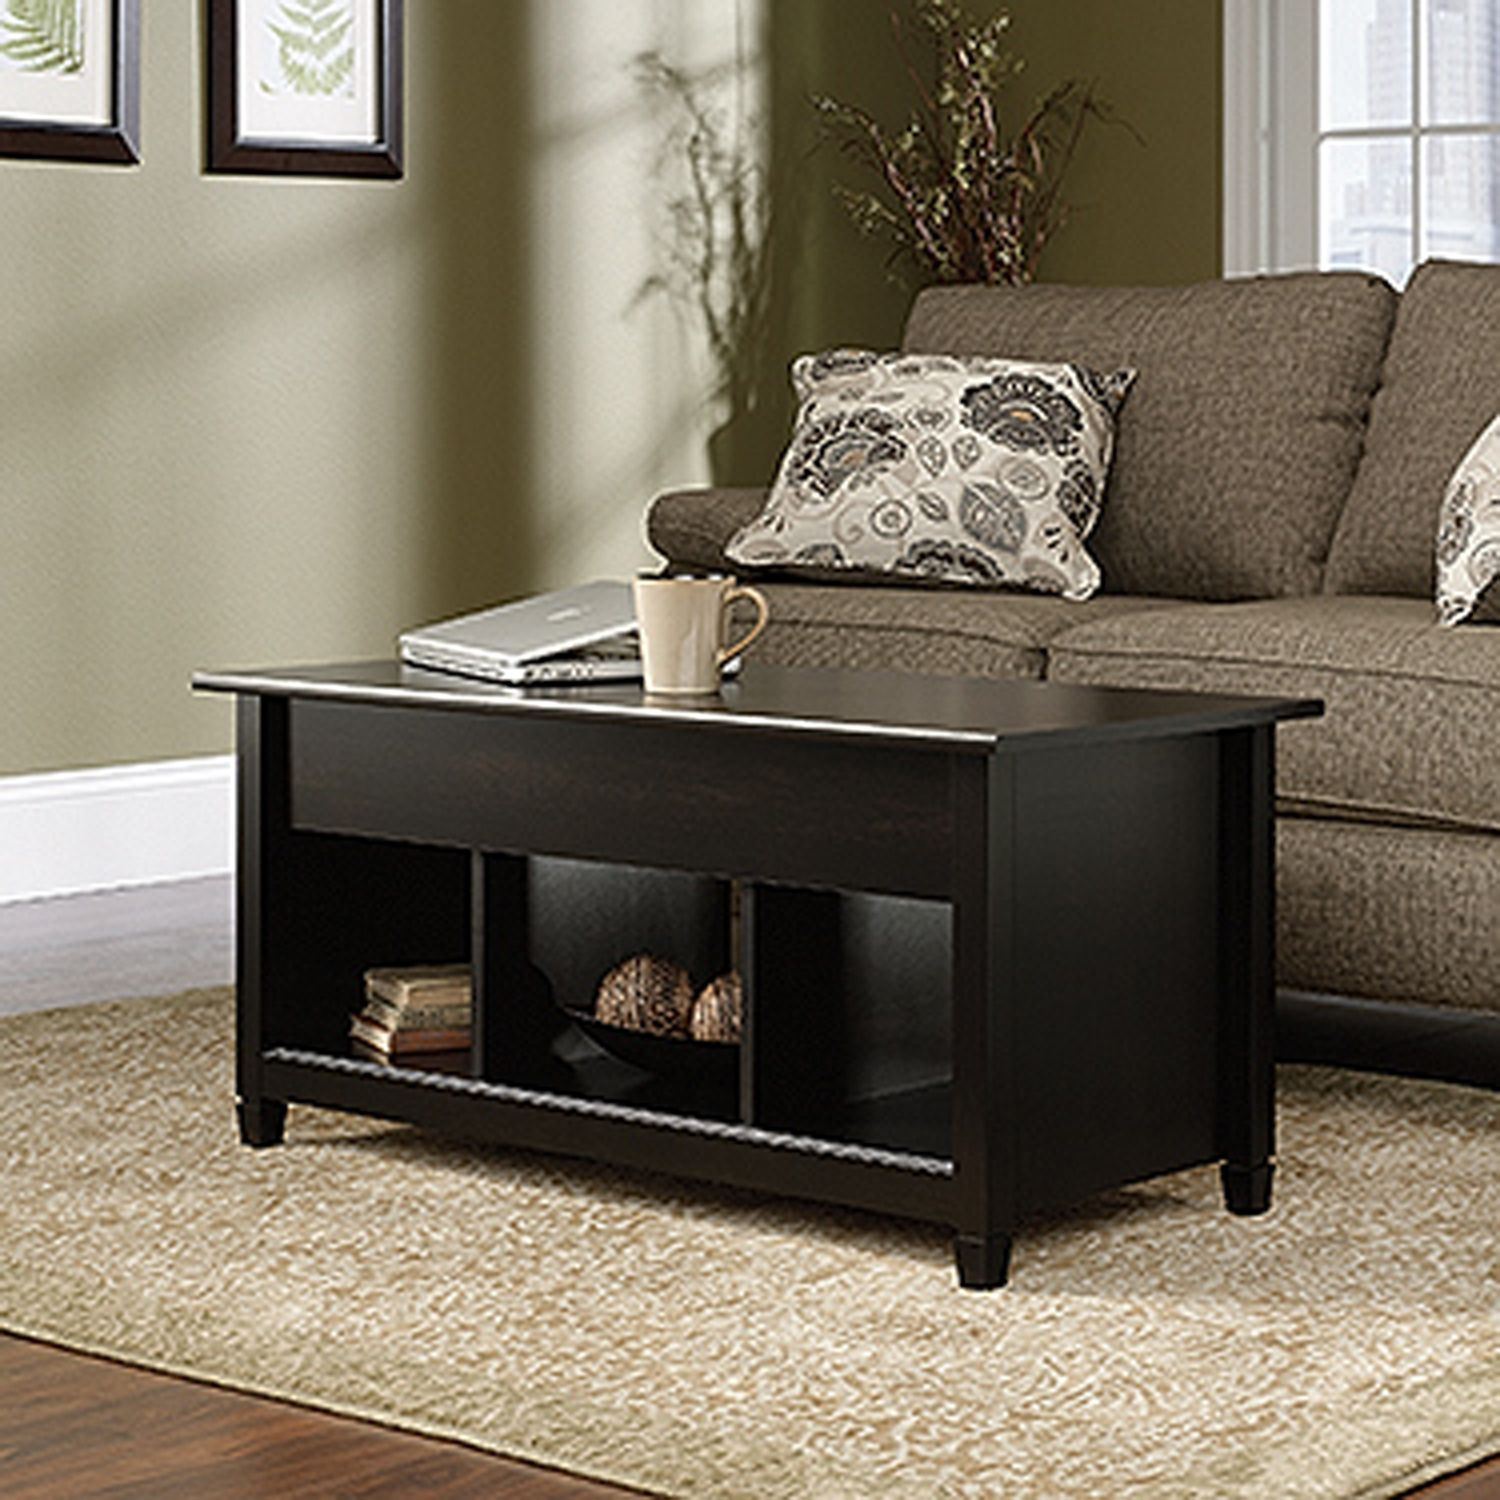 Edge Water Lift-Top Coffee Table Estate Black * D 414856 ...